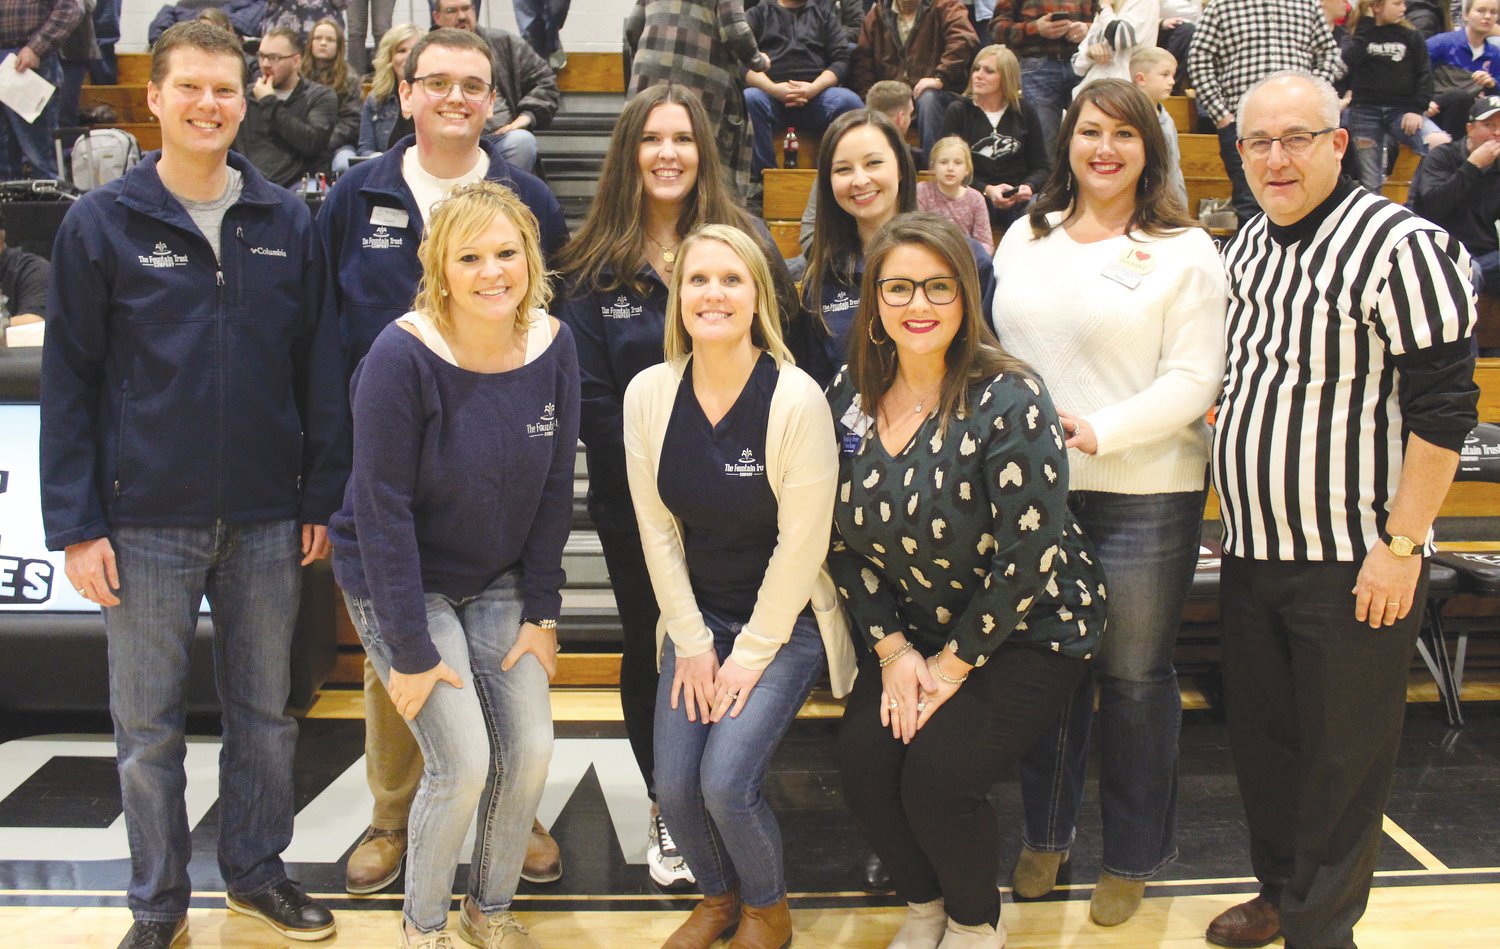 Photo Provided
Friday was Fountain Trust Company Night at the Parke Heritage High School boys basketball game vs. Covington. Between games, members of FTC were recognized for their contributions to many of Parke Heritage’s academic and athletic programs. These include the academic banquet to be held this spring, football team members traveling equipment bags, T-shirts for the dance team clinic, basketball 1,000 point leader board for the boys at the middle school and for the girls at the high school, and team chairs used by basketball players and at graduation. Since 2002, The Fountain Trust Company has sponsored the popcorn bags and napkins at academic and sporting events for the school corporation. On Friday, FTC sponsored 500 bags of free popcorn for those in attendance. NCP Schools appreciates all of the contributions made by FTC. Thank you to Fountain Trust Company president Lucas White and other FTC staff members, which include Heather Martin, Grant Dickey, Christiana Overpeck, Cassidy Helms, Kristine Poer, Kelsey Kellams, Stacy Felix and Doug Weisheit who were in attendance at the ball game. Pictured are, from left, front row, Heather Martin, Kristine Poer and Cassidy Helms; and back row, Lucas White, Grant Dickey, Christiana Overpeck, Kelsey Kellams, Stacy Felix and Doug Weisheit.